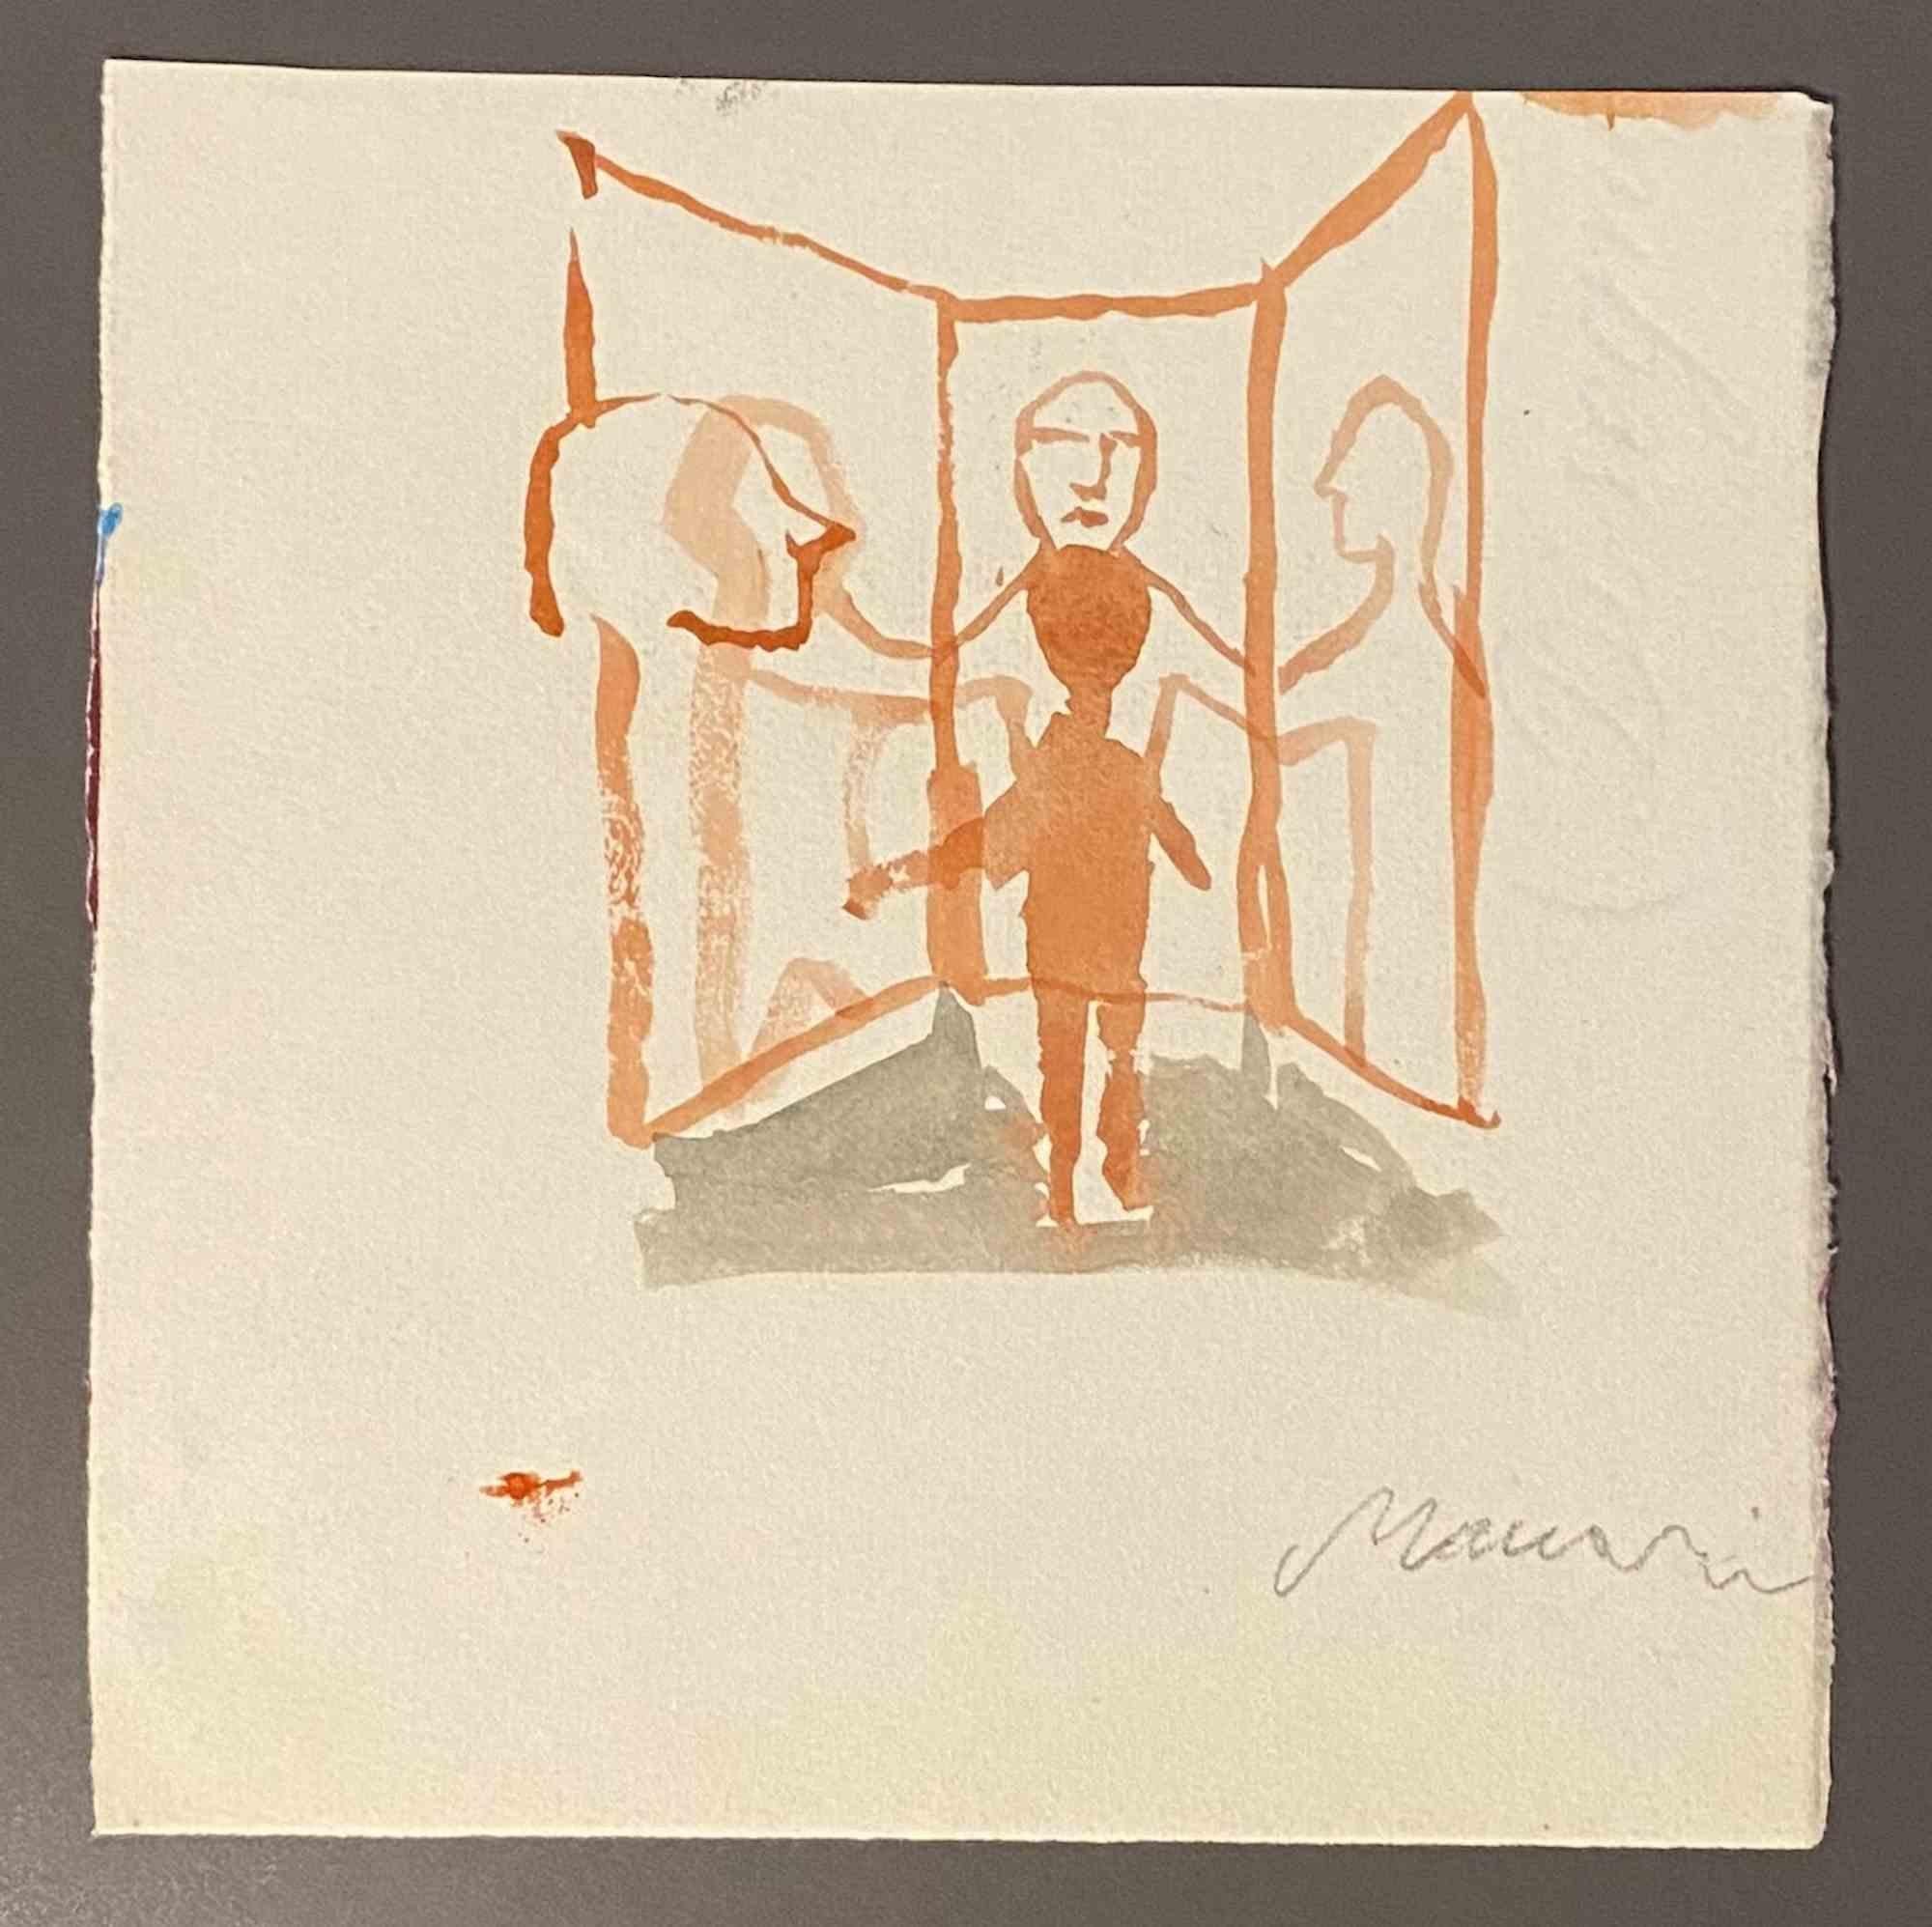 The Mirror is a Watercolor Drawing realized by Mino Maccari  (1924-1989) in the Mid-20th Century.

Hand-signed on the lower.

Good conditions.

Mino Maccari (Siena, 1924-Rome, June 16, 1989) was an Italian writer, painter, engraver and journalist,